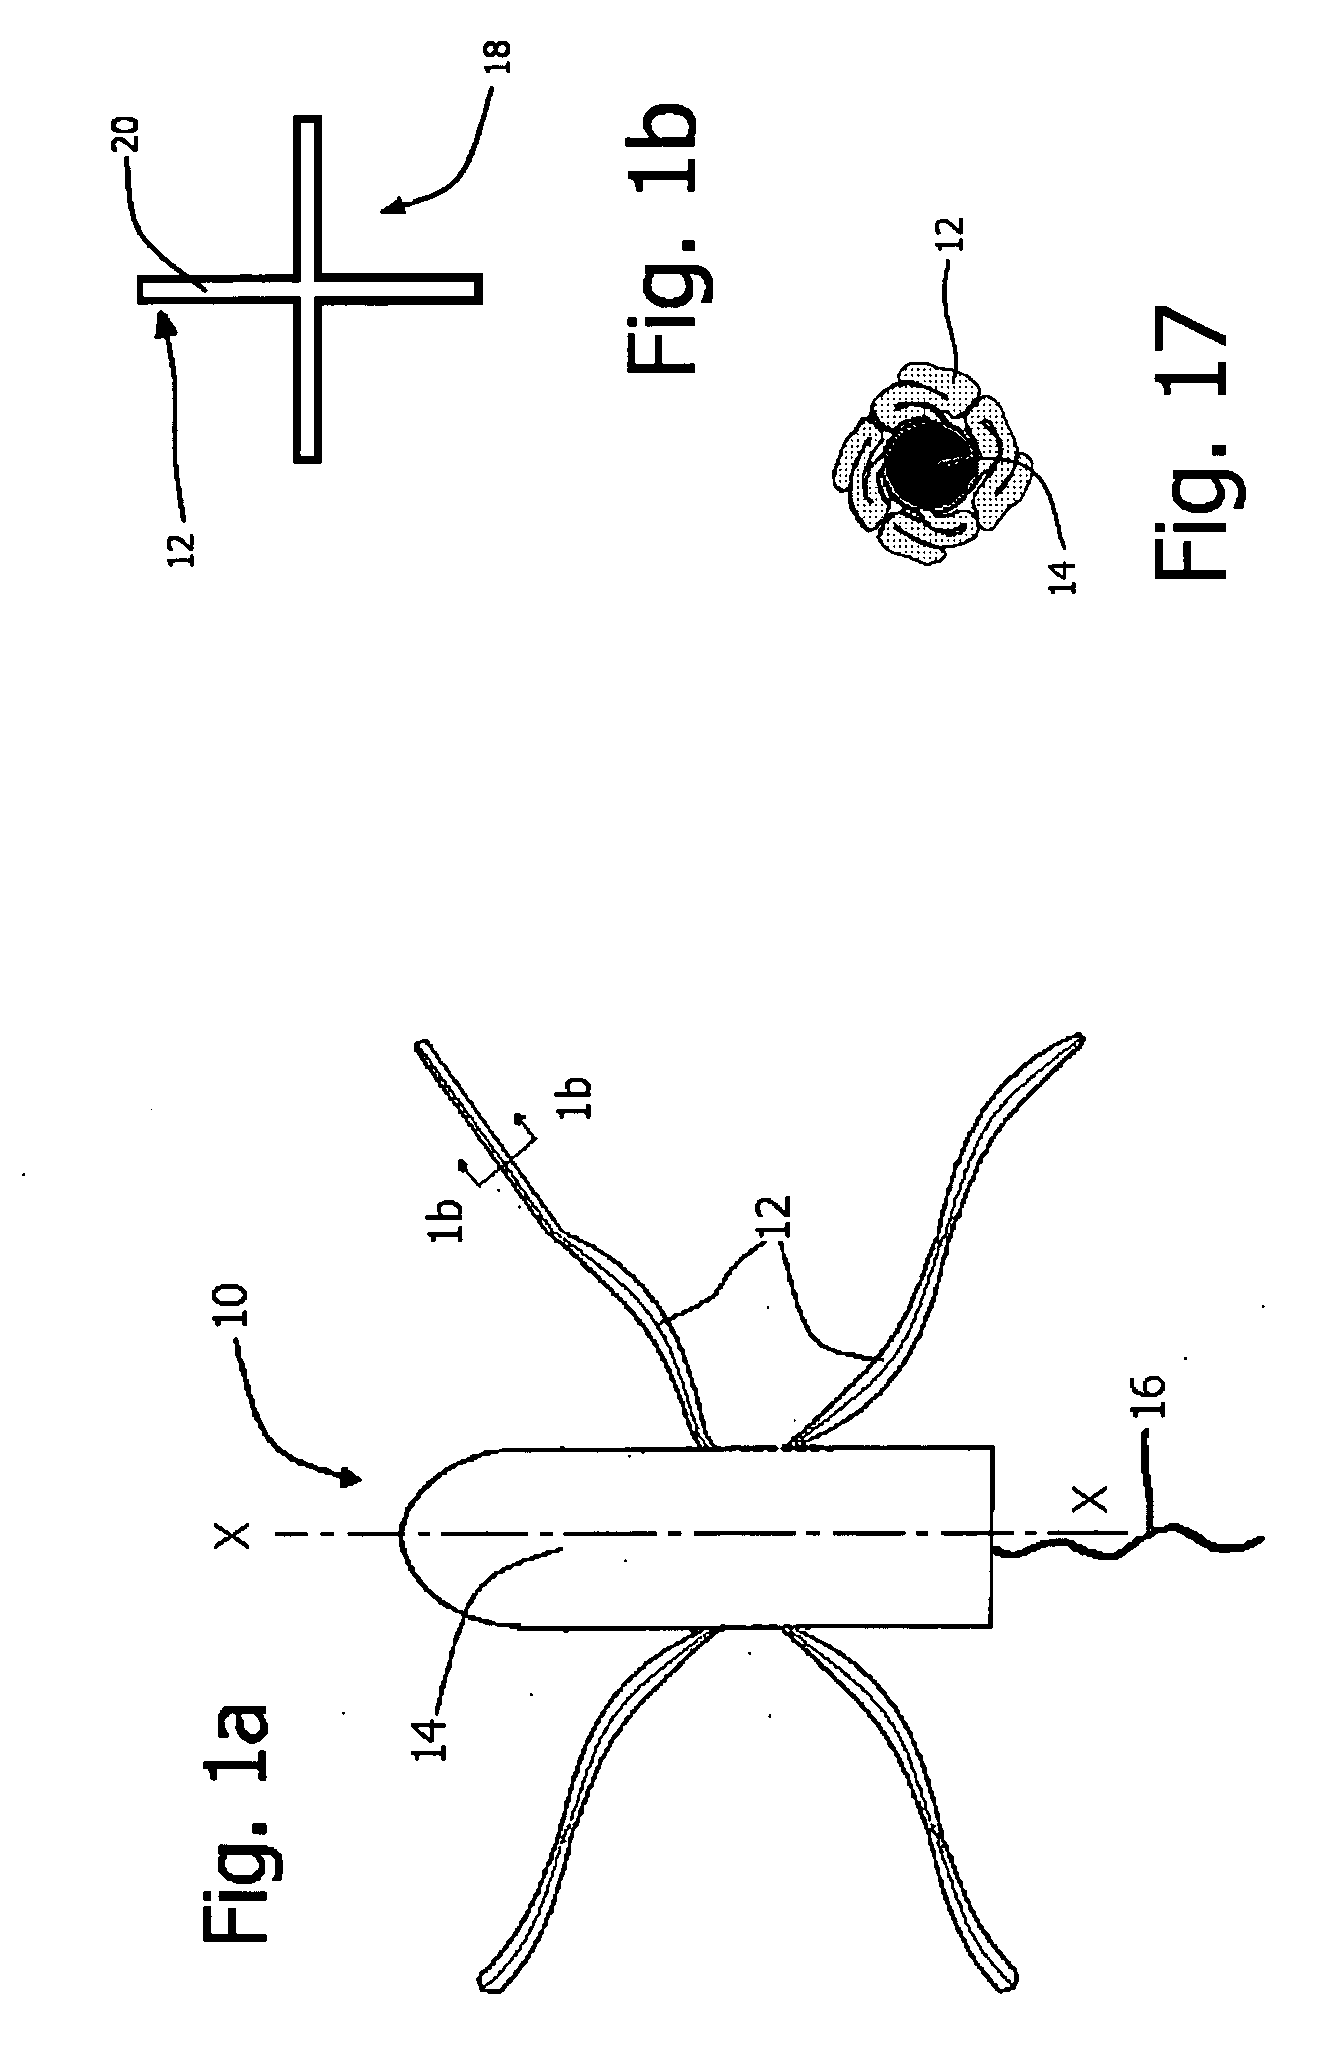 Method of using intravaginal device with fluid transport plates